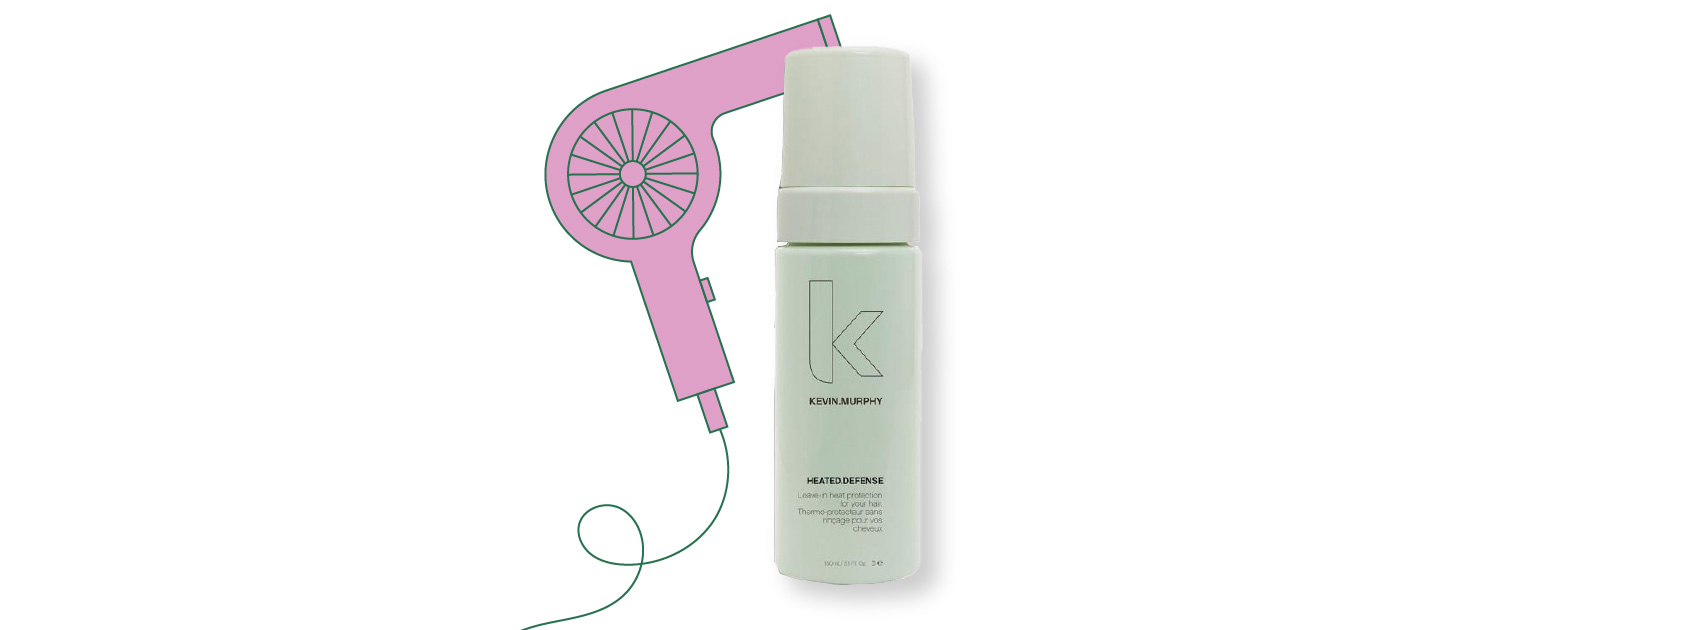 bottle of heated defense by kevin murphy with an illustration of hairdryer